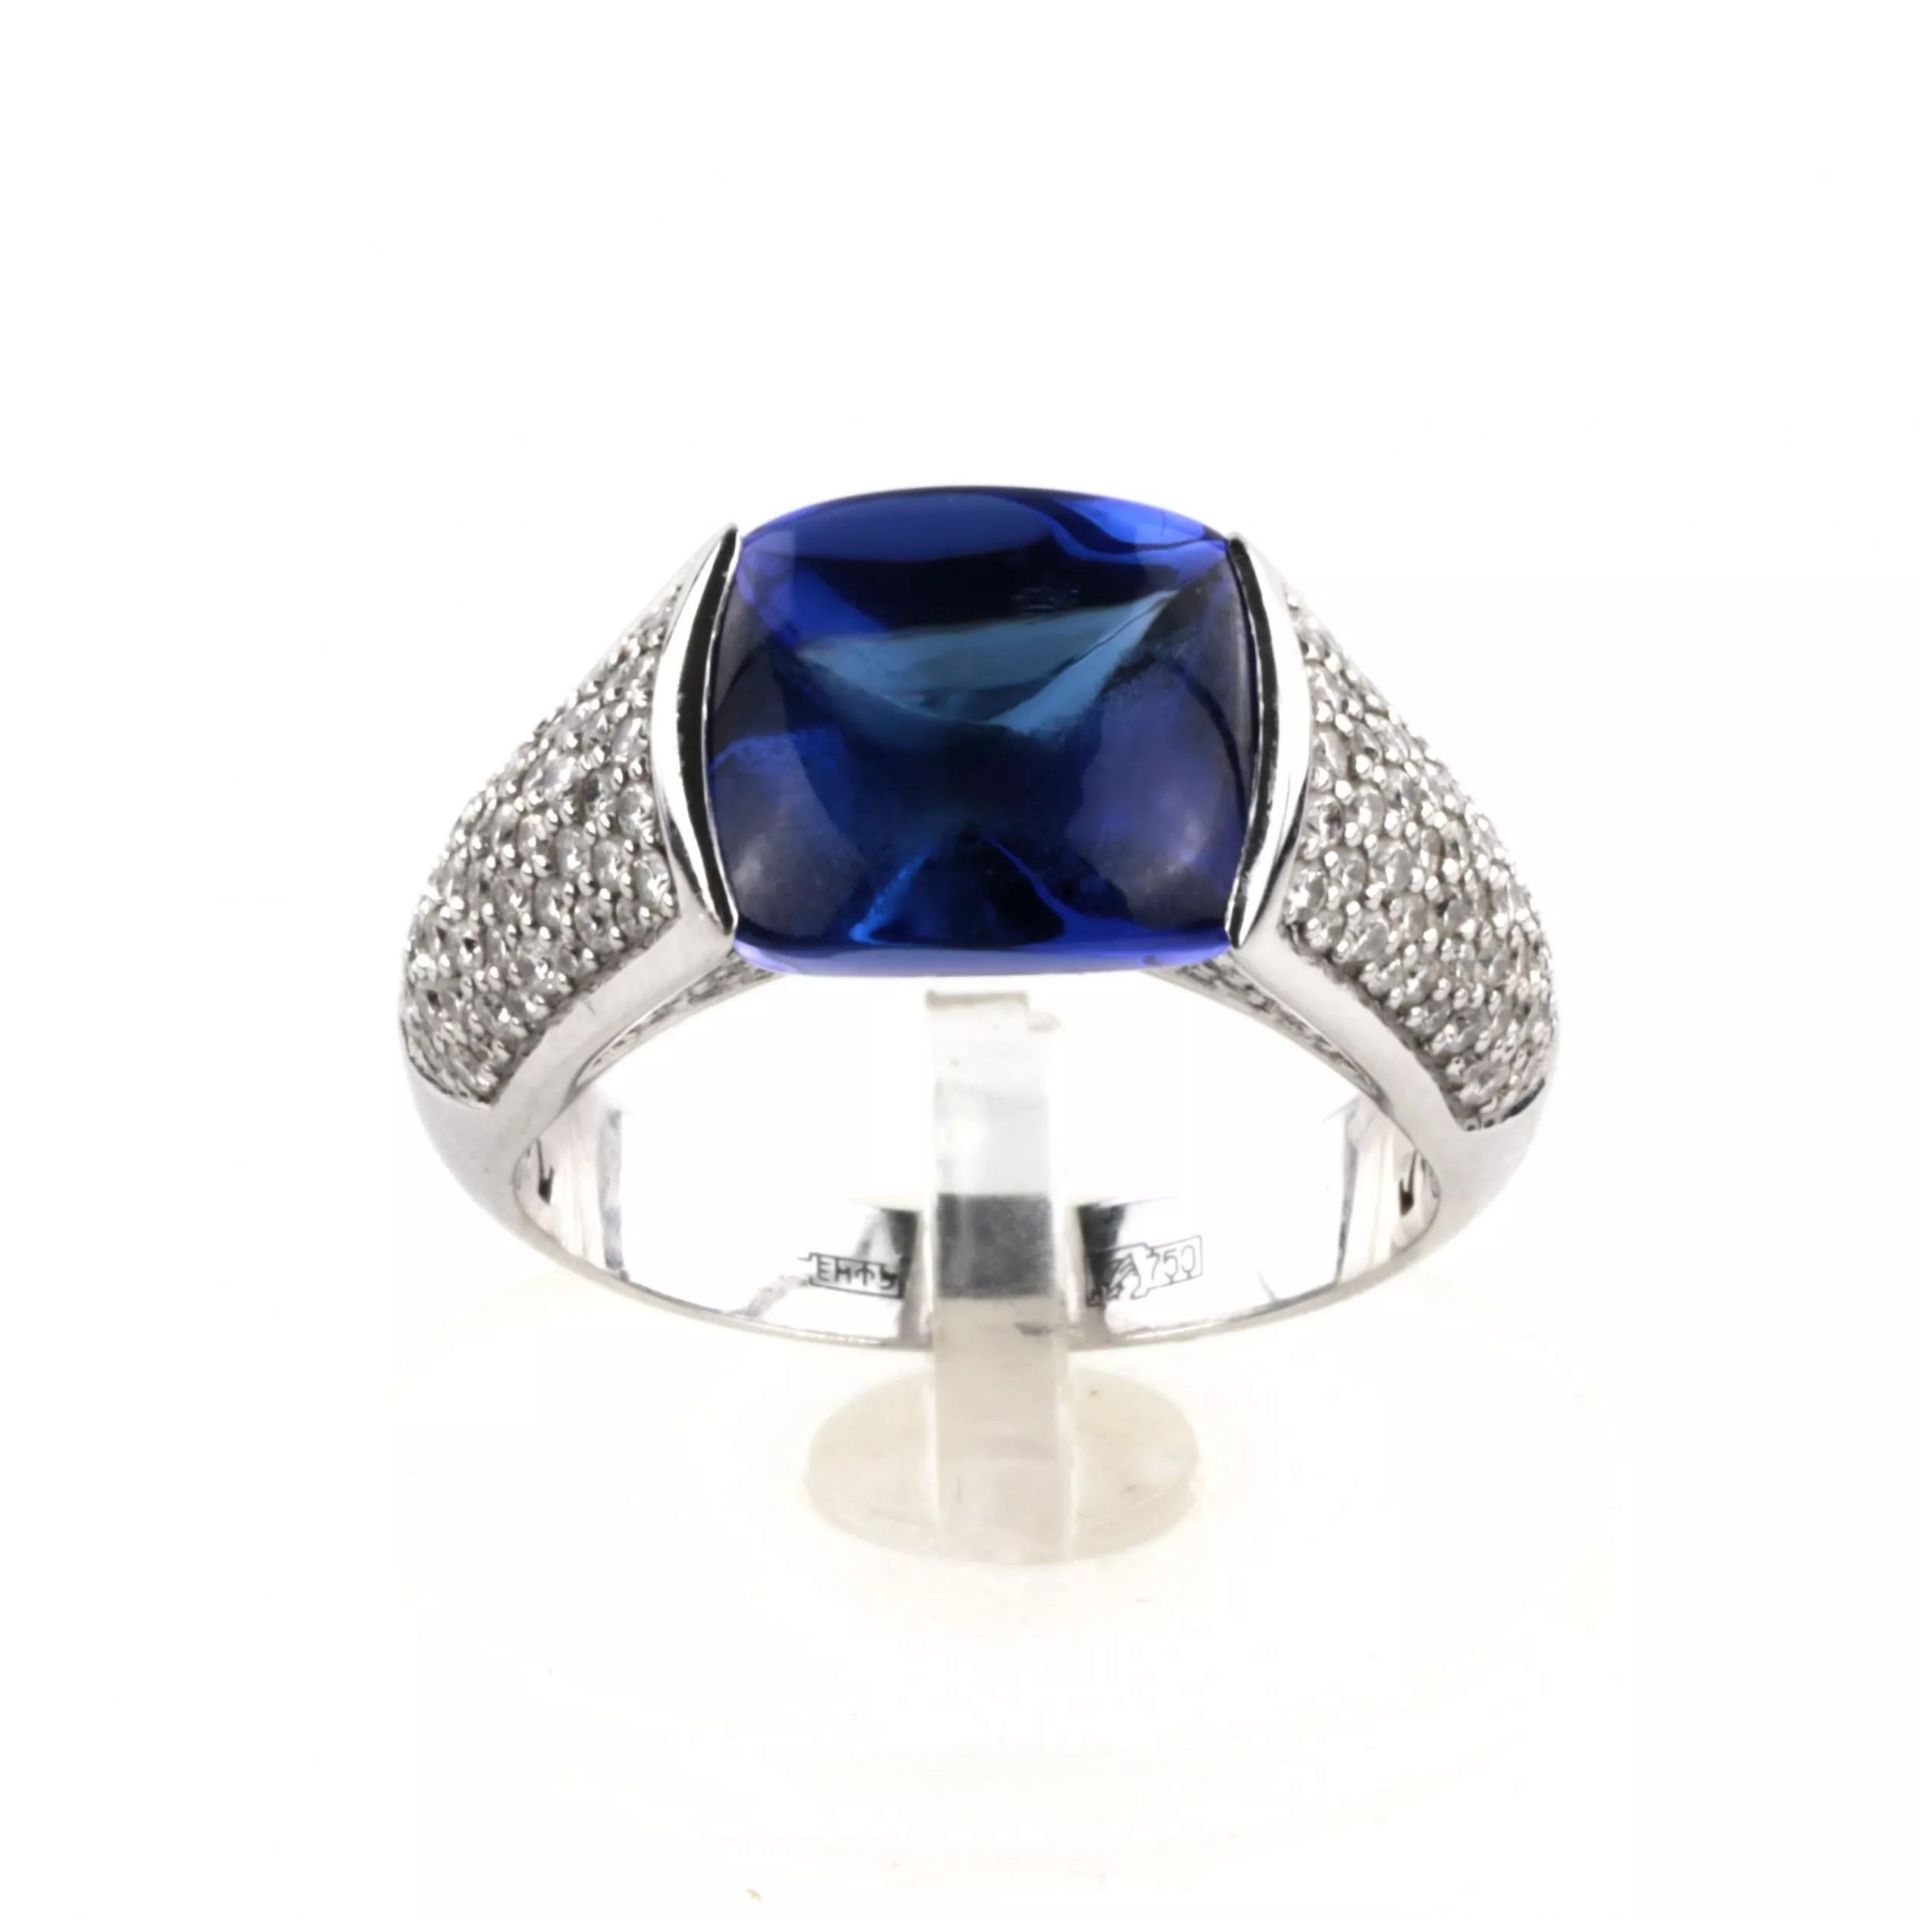 18K white gold ring with diamonds and tanzanite. - Image 2 of 9